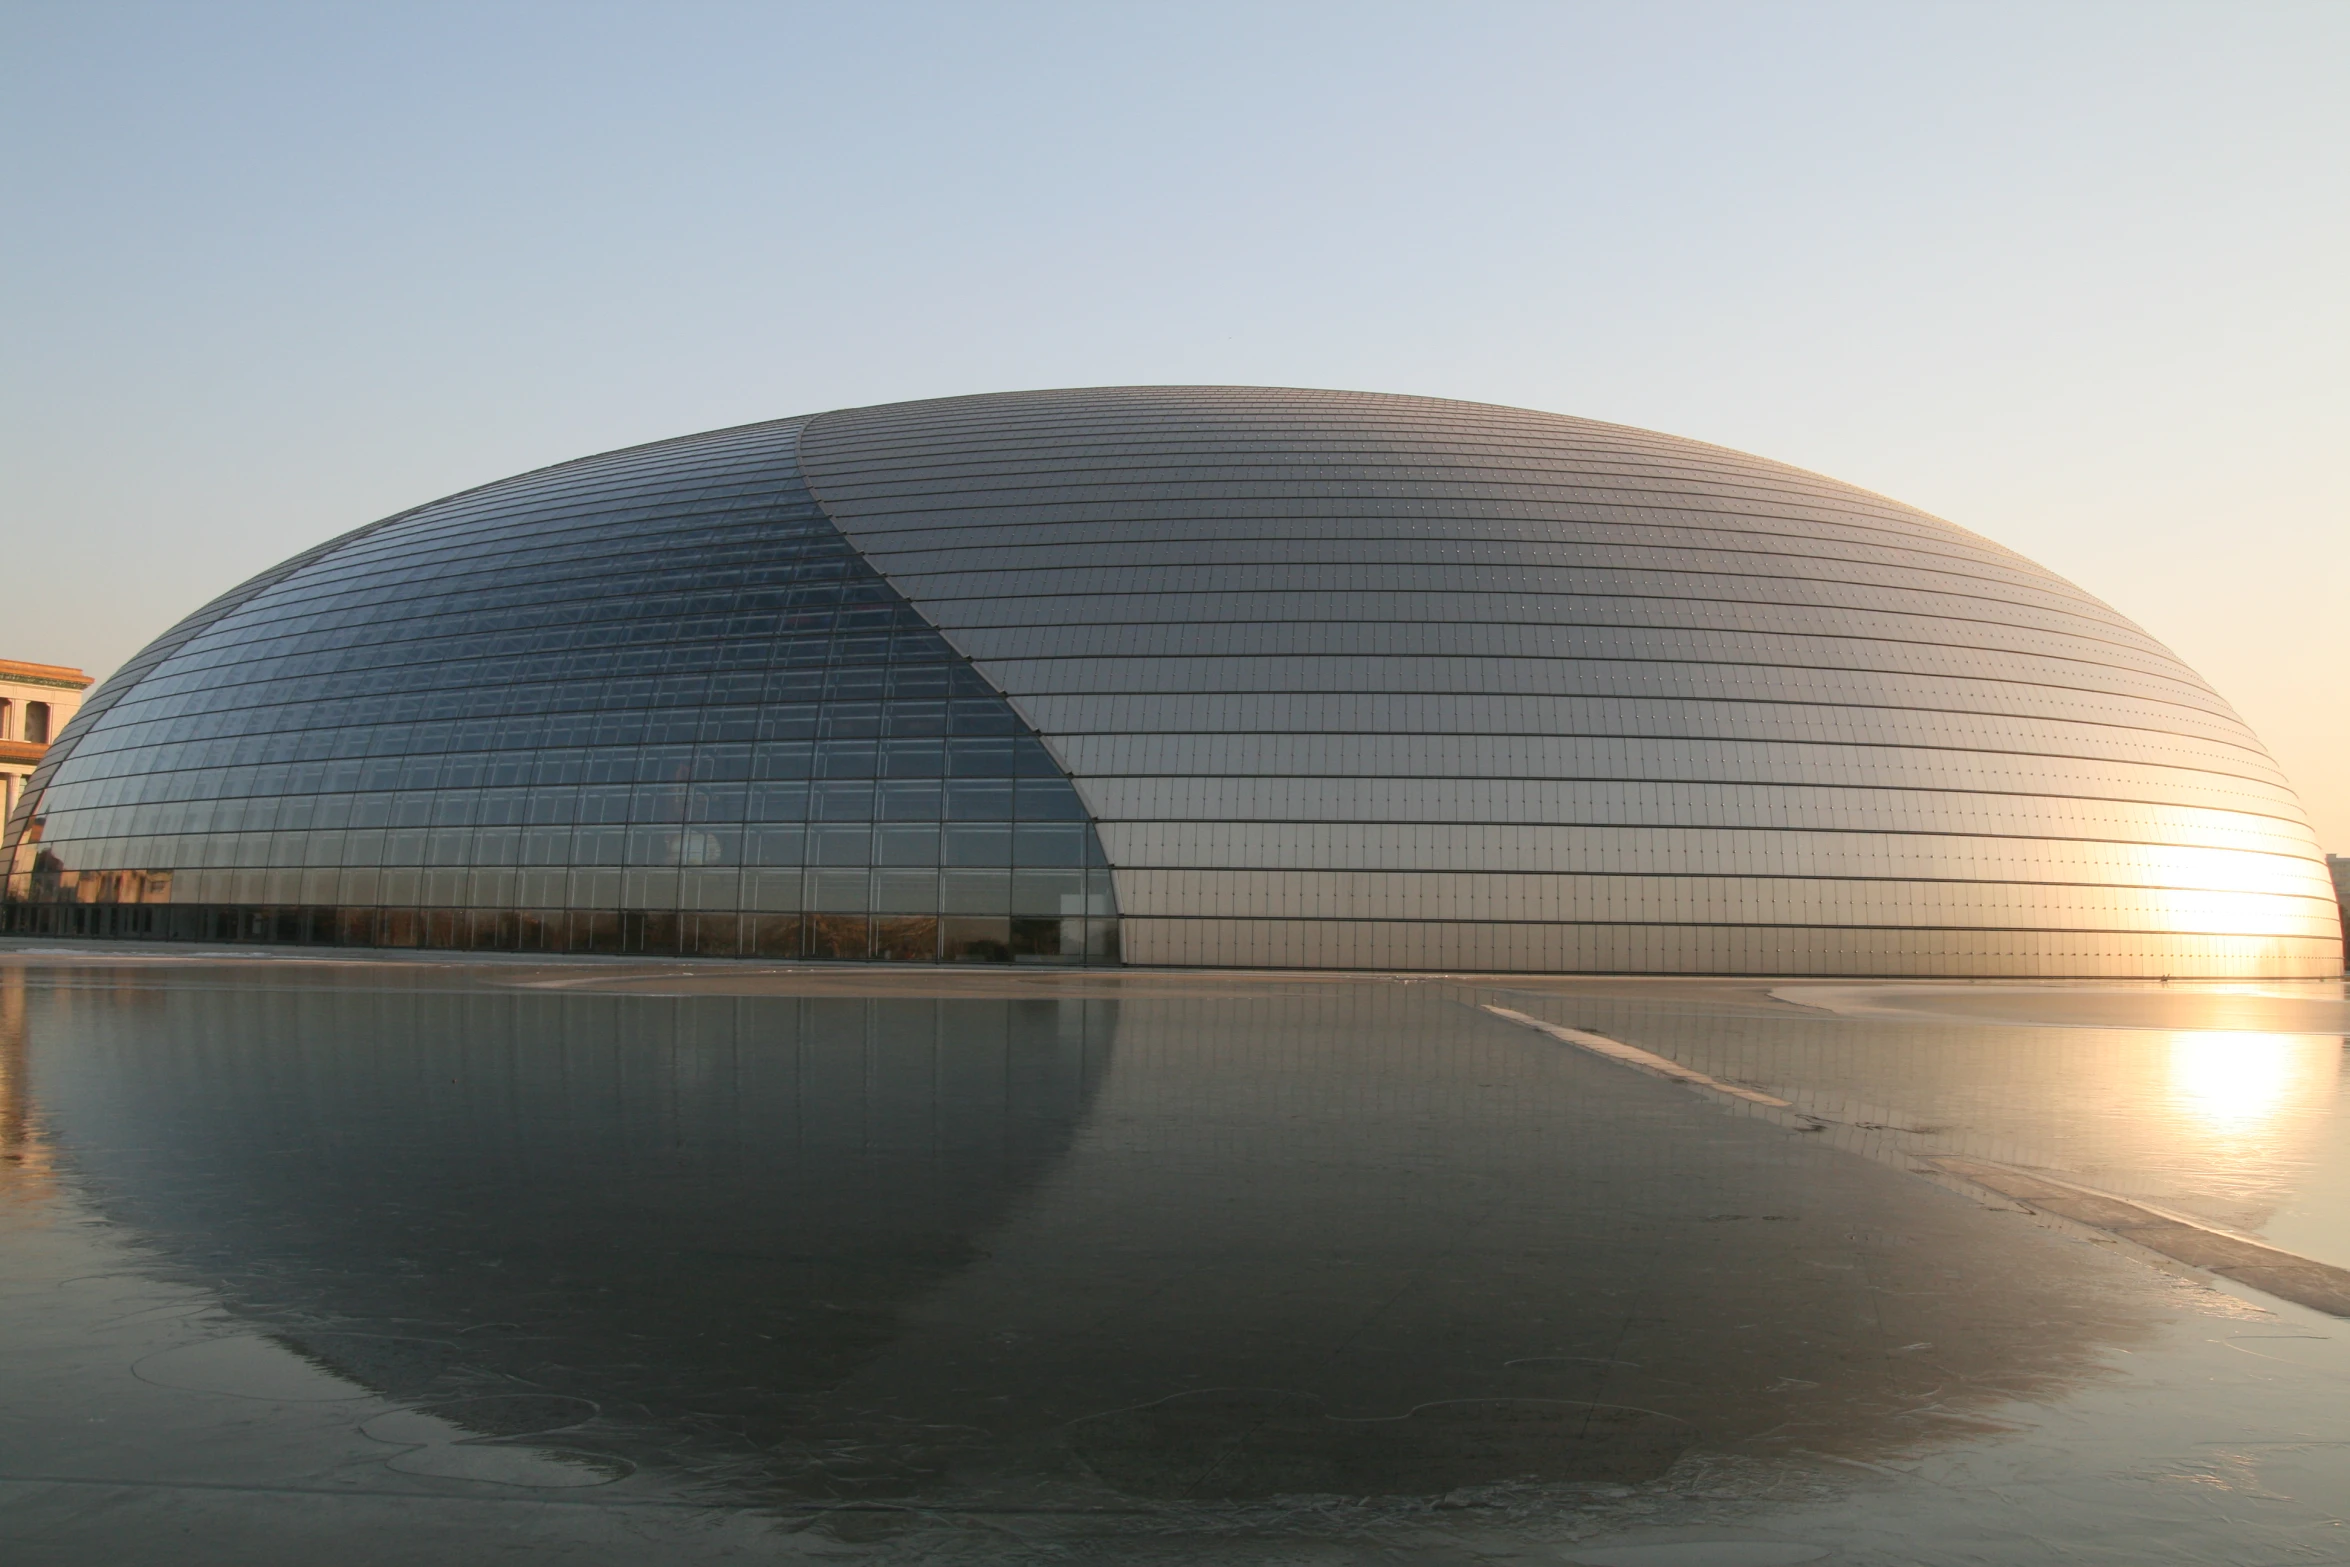 an exterior view of the sun rising over a dome structure